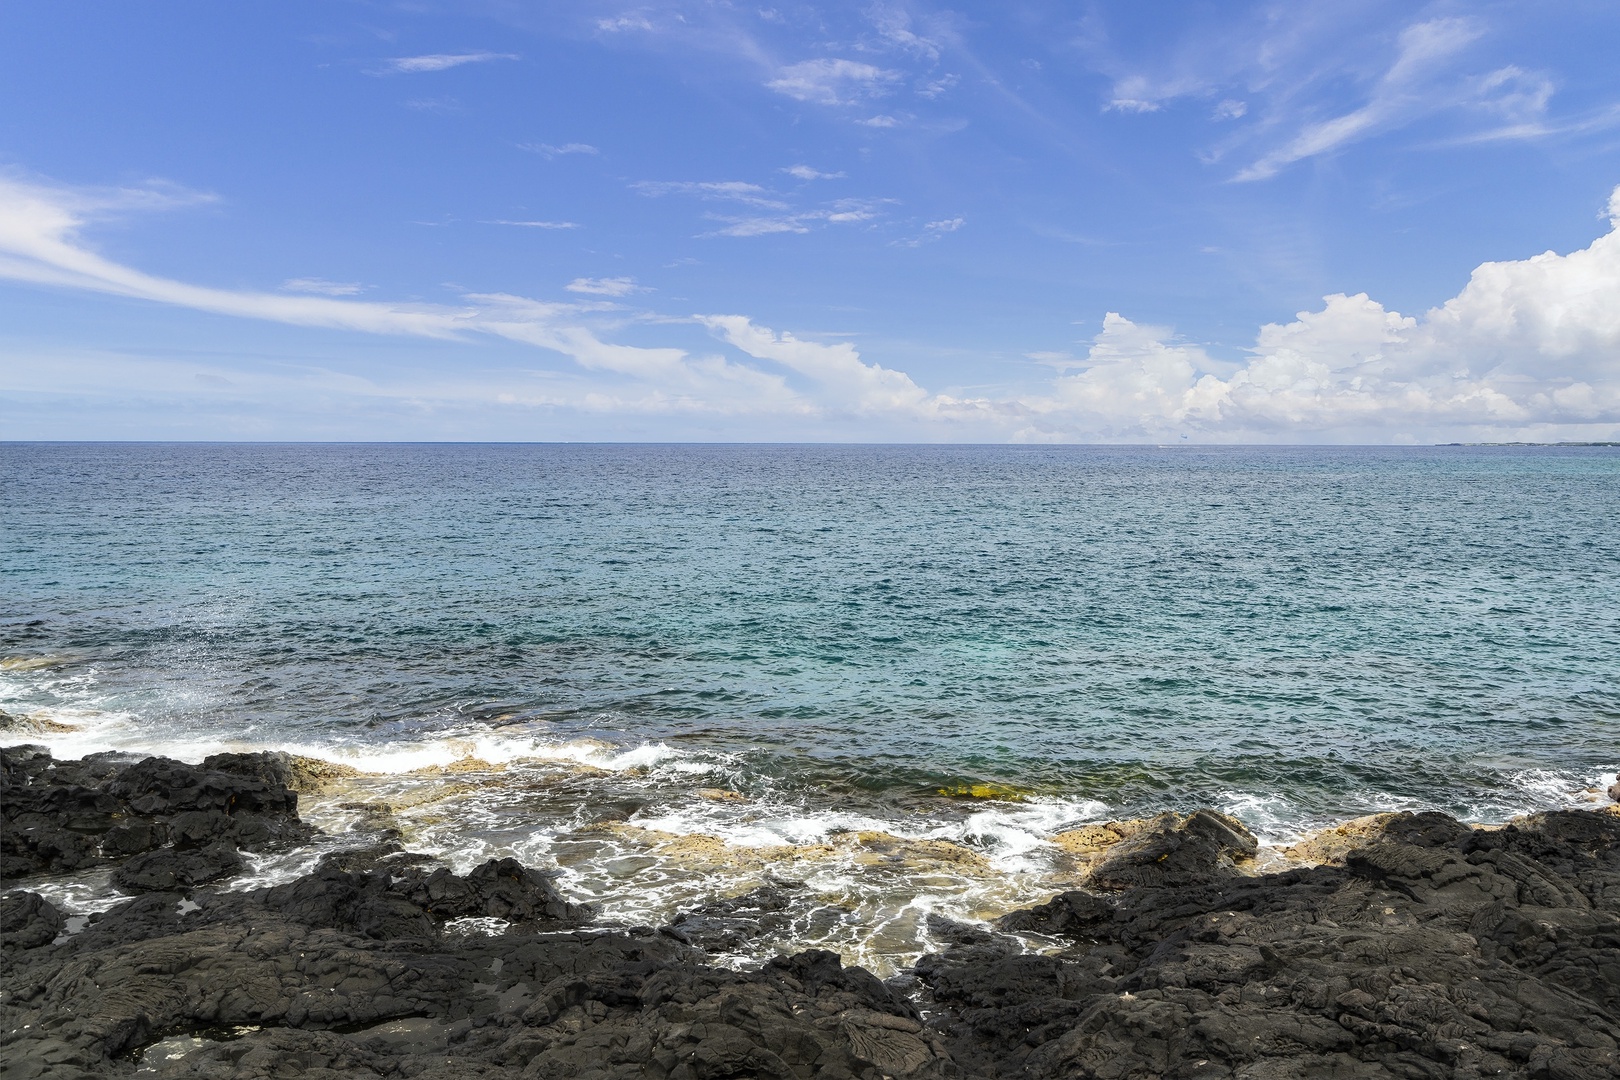 Kailua Kona Vacation Rentals, Ali'i Point #12 - Just a bit of lave between you and the breathtaking Kona shoreline!